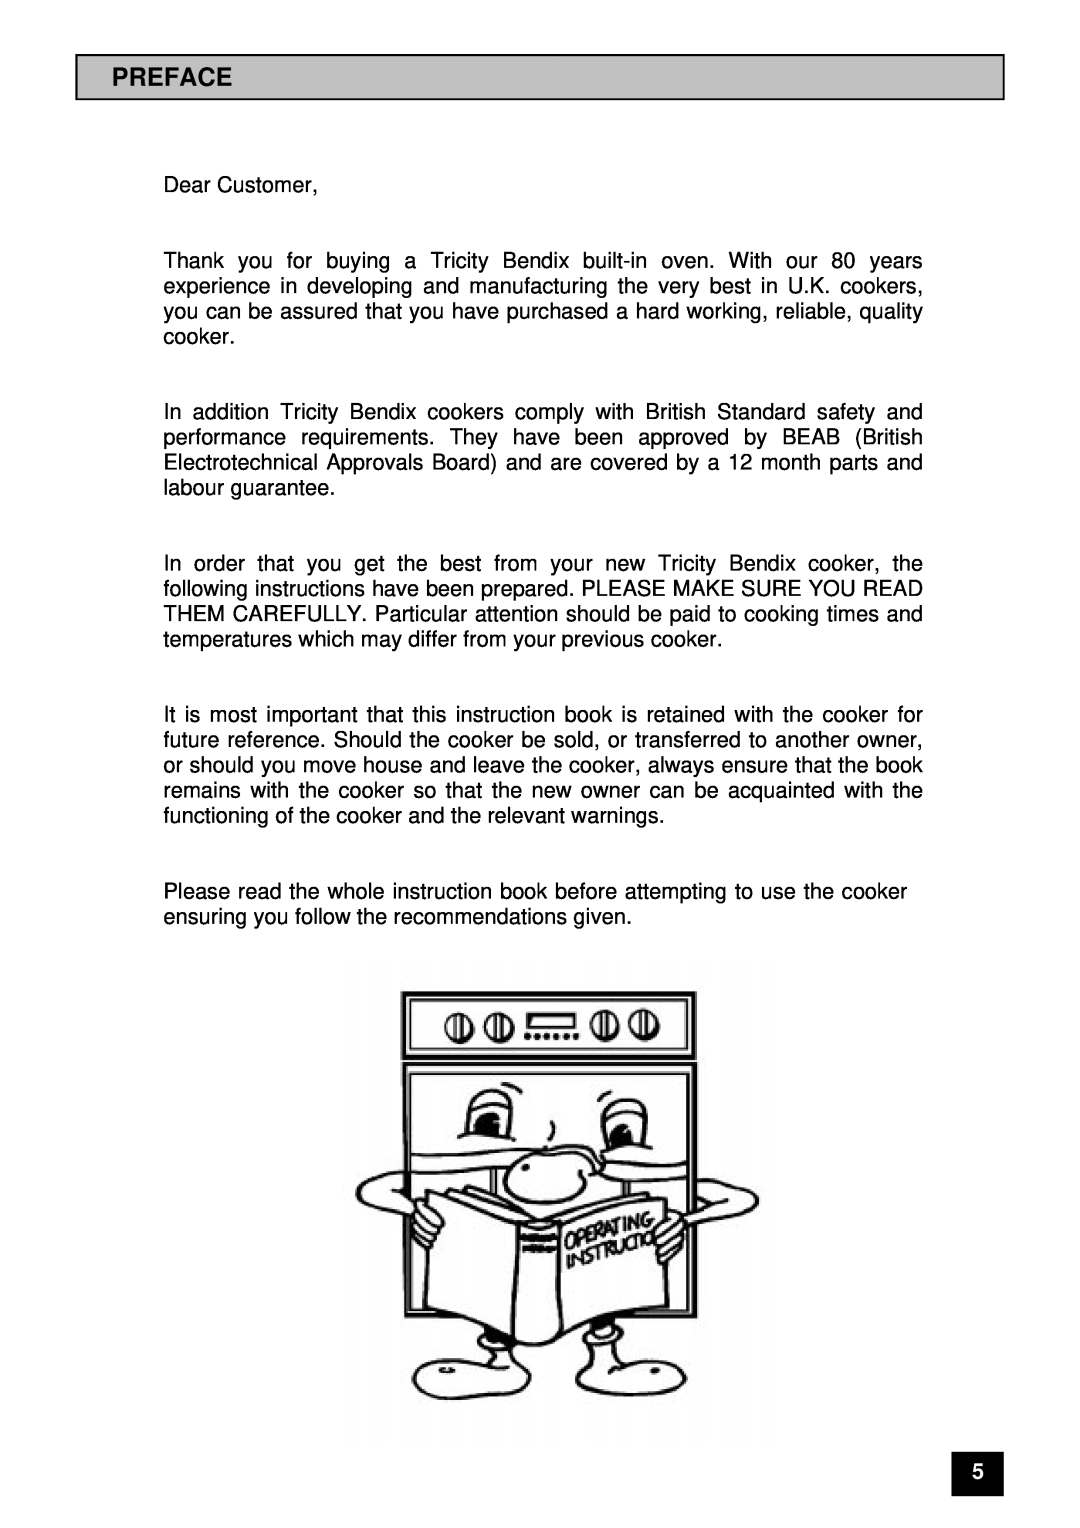 Tricity Bendix BS 600 installation instructions Preface 